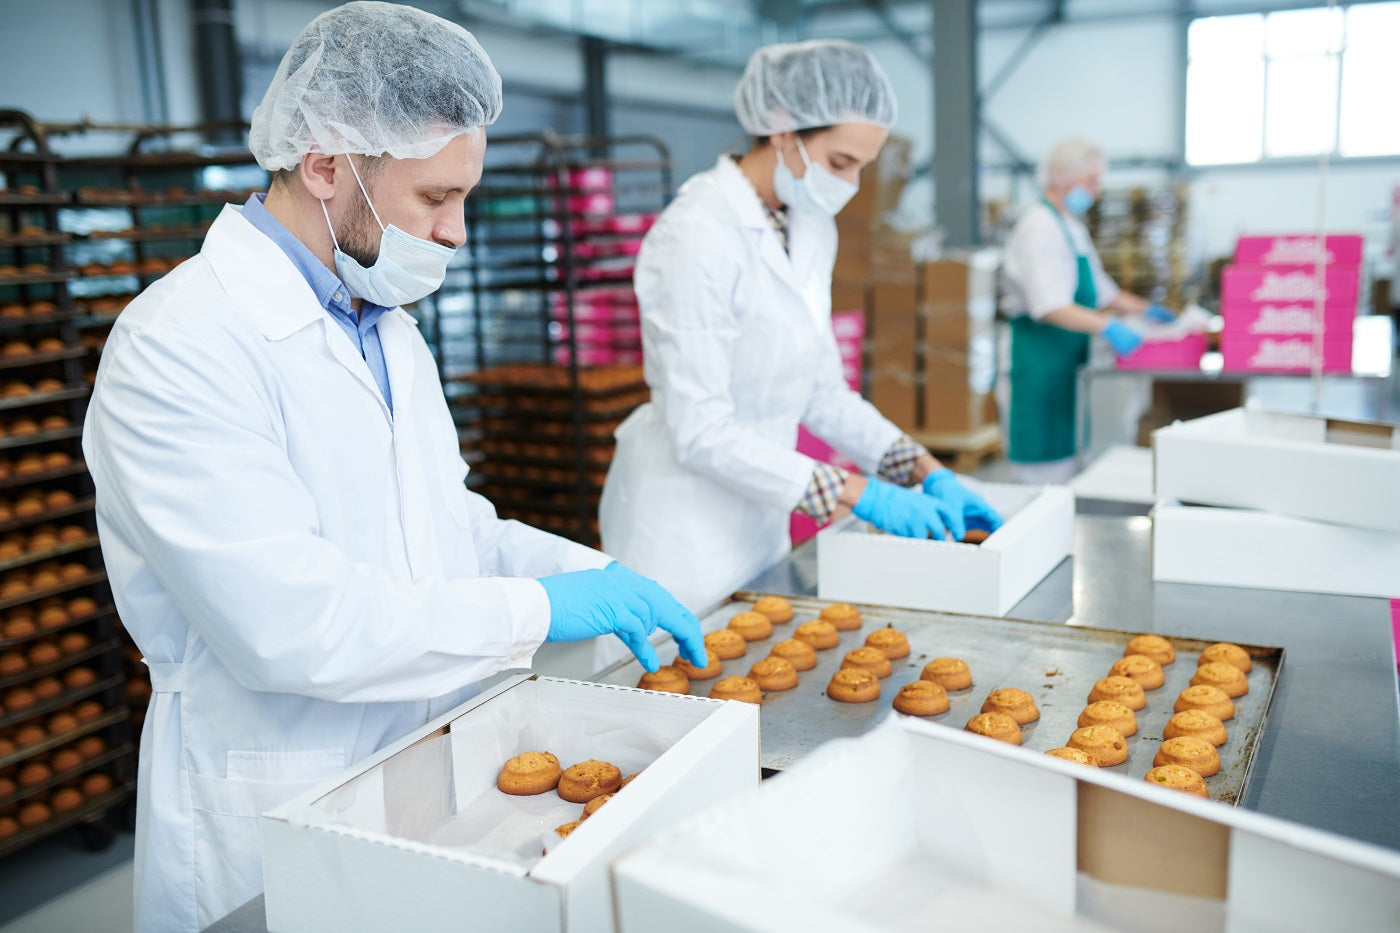 NEOS Food Services Overshoes Are Ideal Footwear For Working In Food Industry